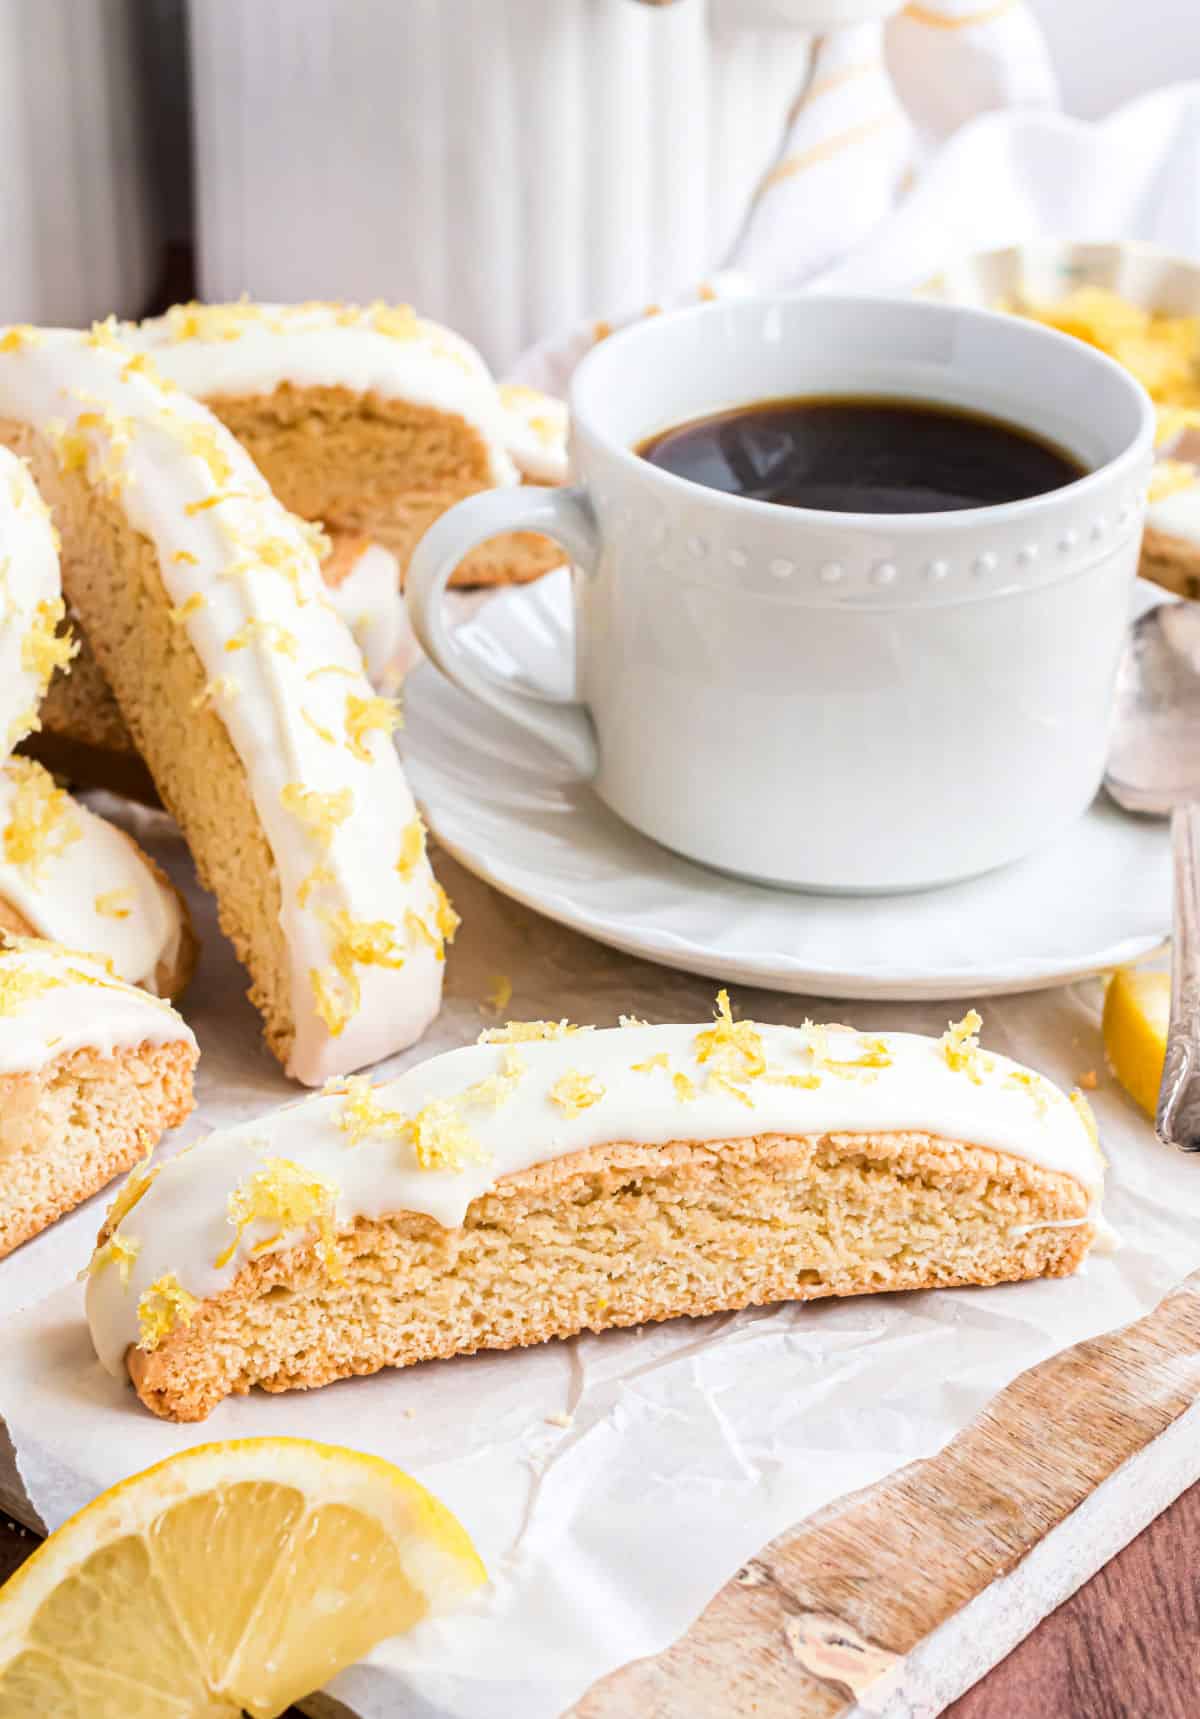 Lemon biscotti dipped in white chocolate served with a small white mug of coffee.